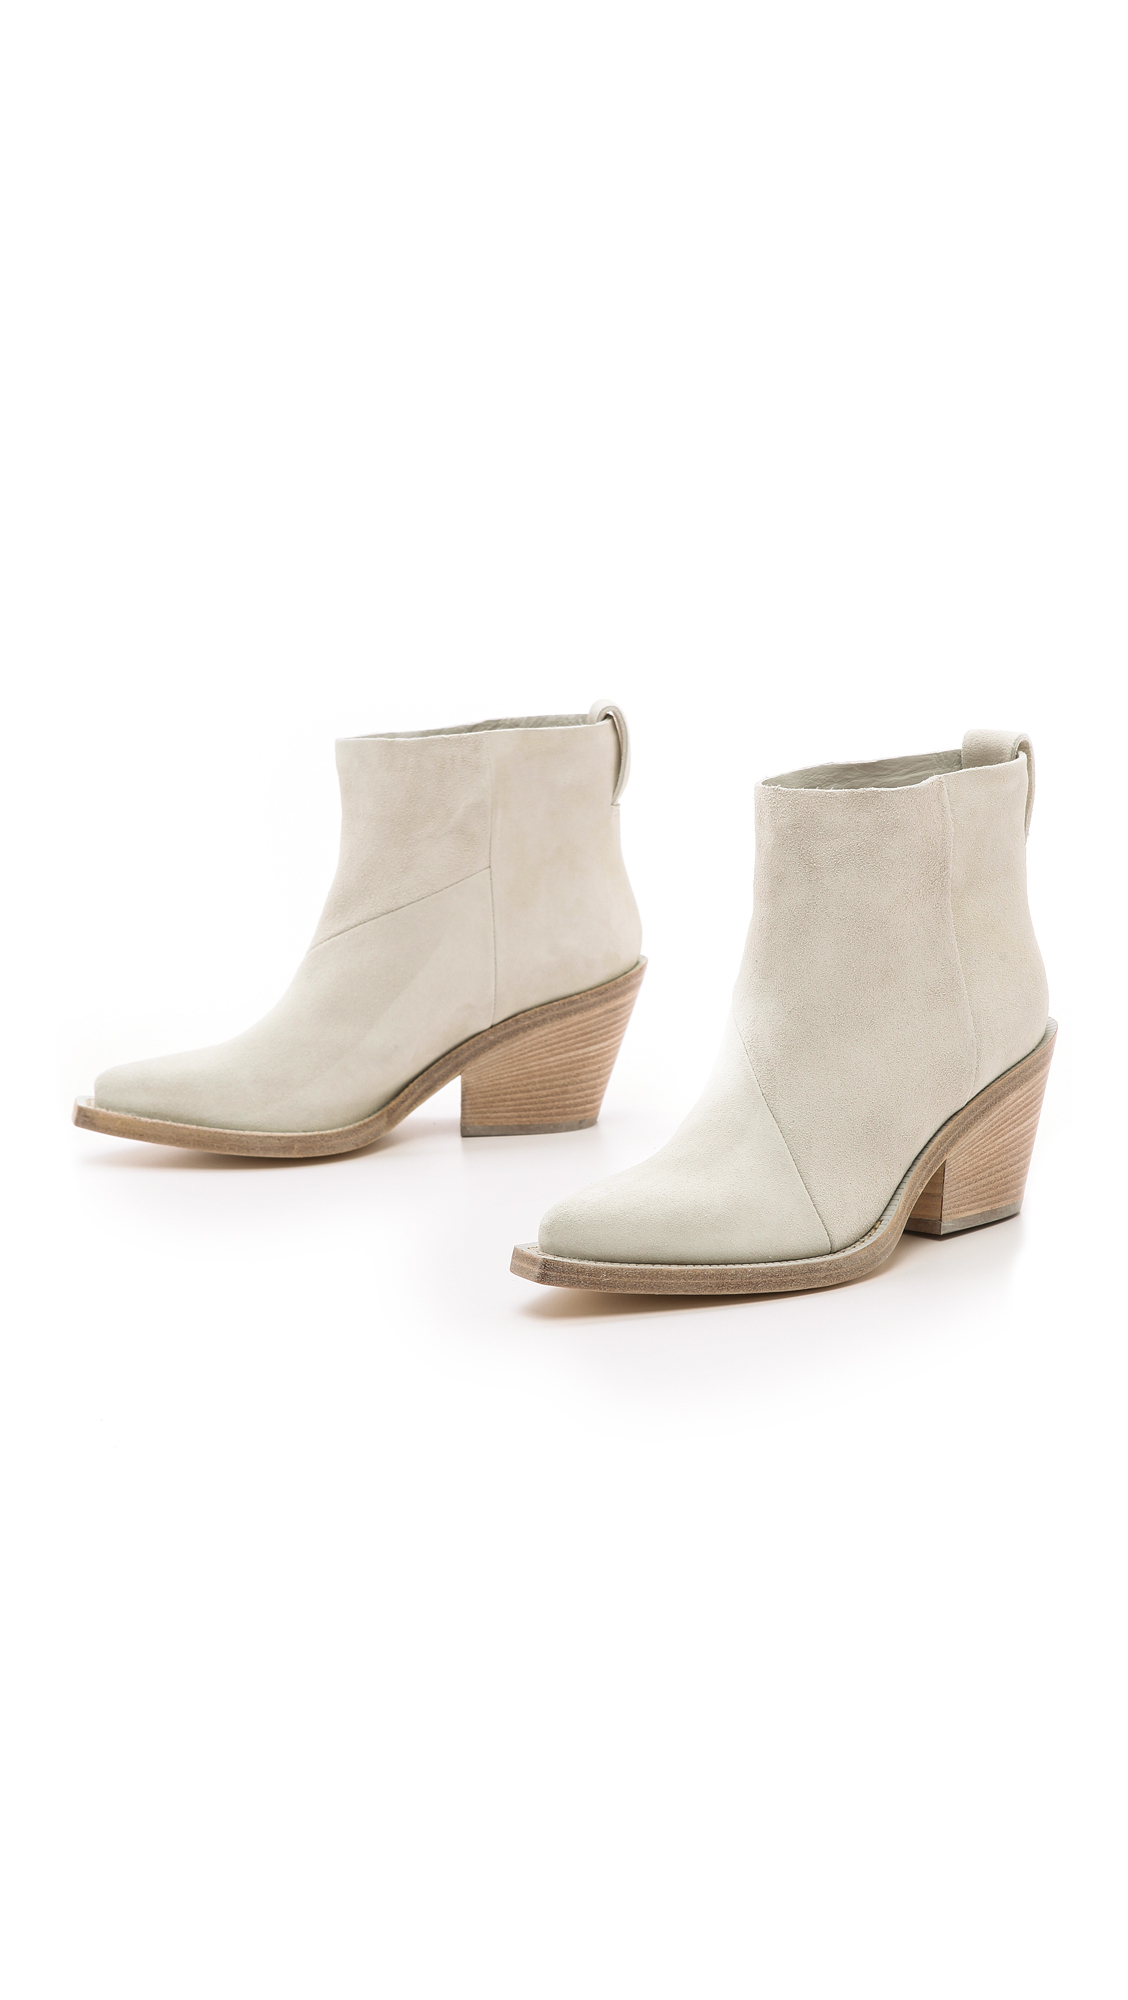 Lyst - Acne Studios Donna Suede Boots in White